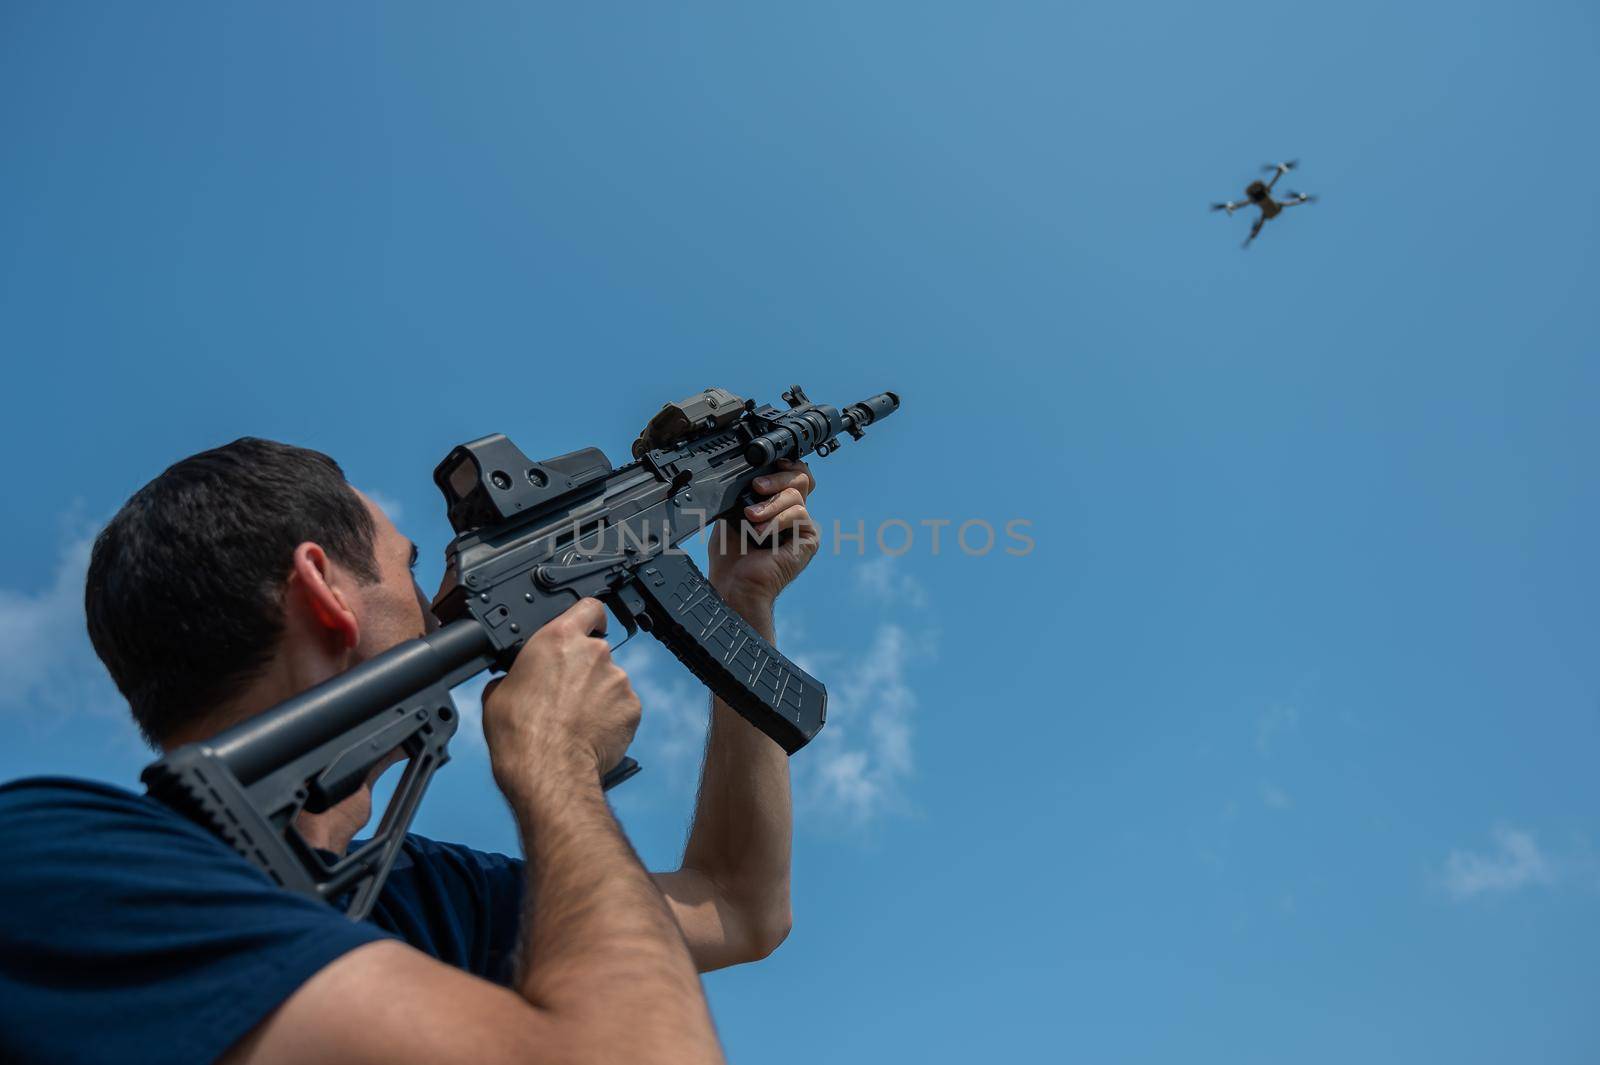 Caucasian man shoots a flying drone with a rifle. by mrwed54